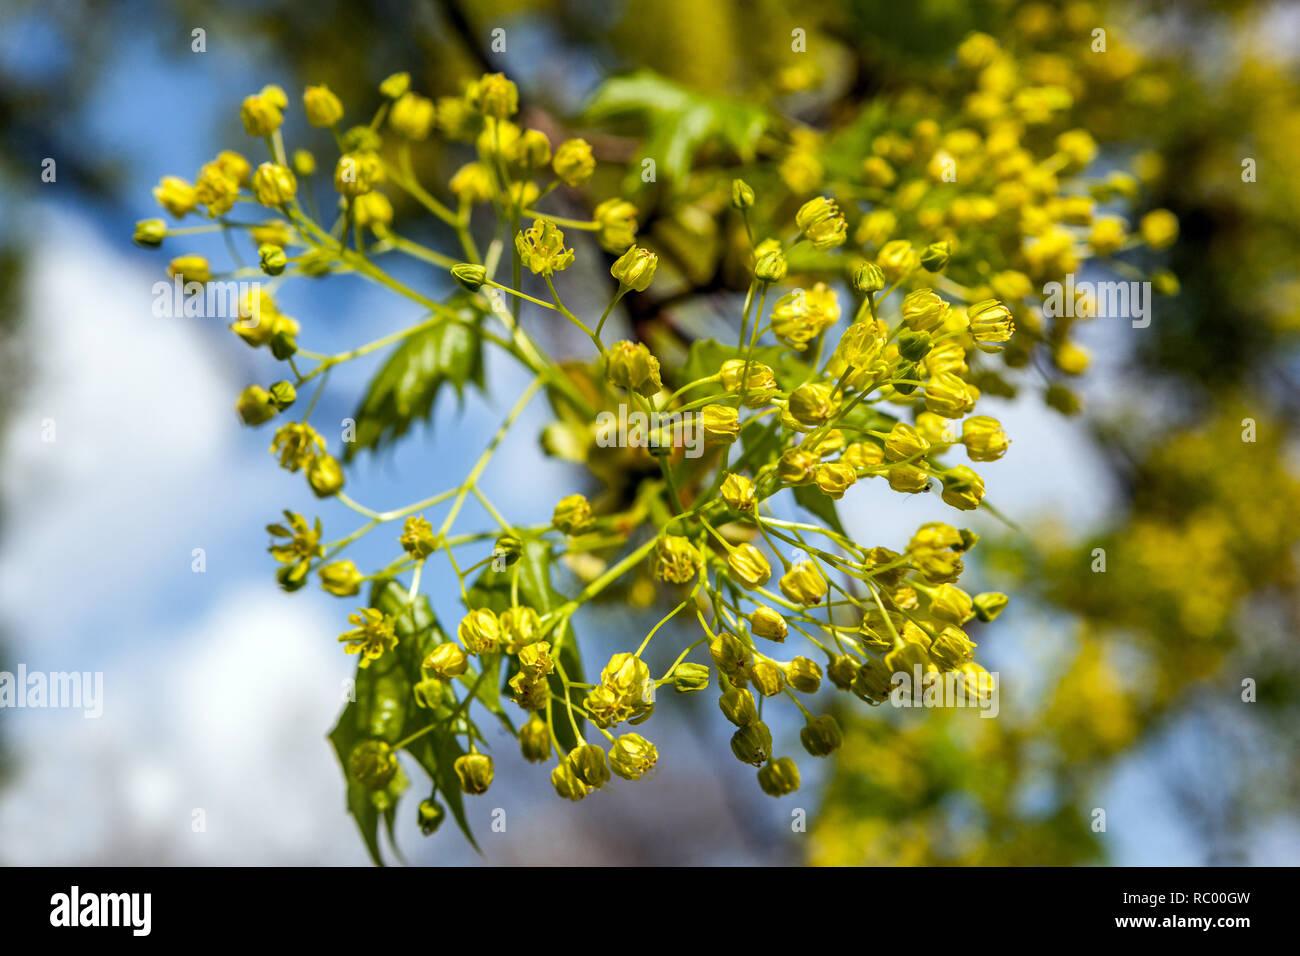 Norway Maple flowers Acer platanoides, flowers Spring blossoms in spring Stock Photo